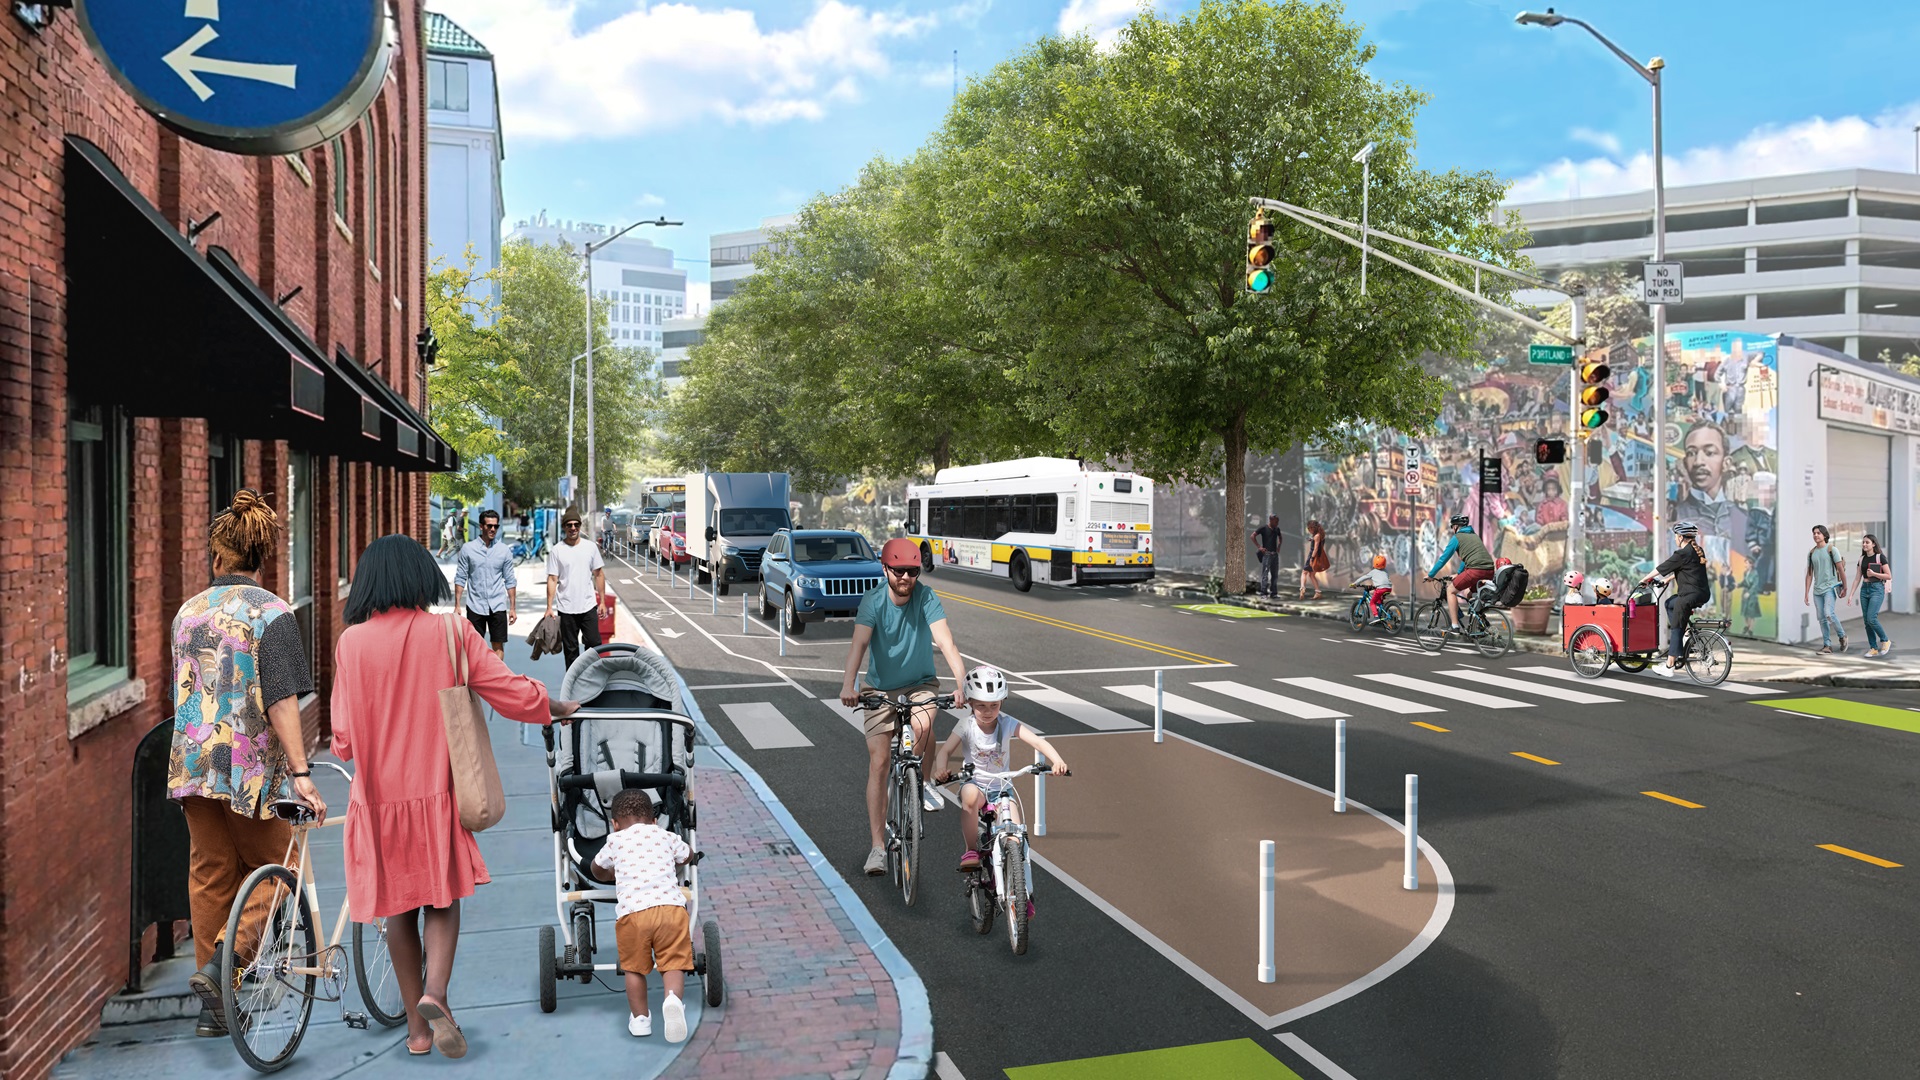 Mock up of what Hampshire Street will look like with separated bike lanes. The image shows the block between Cardinal Medeiros and Broadway.